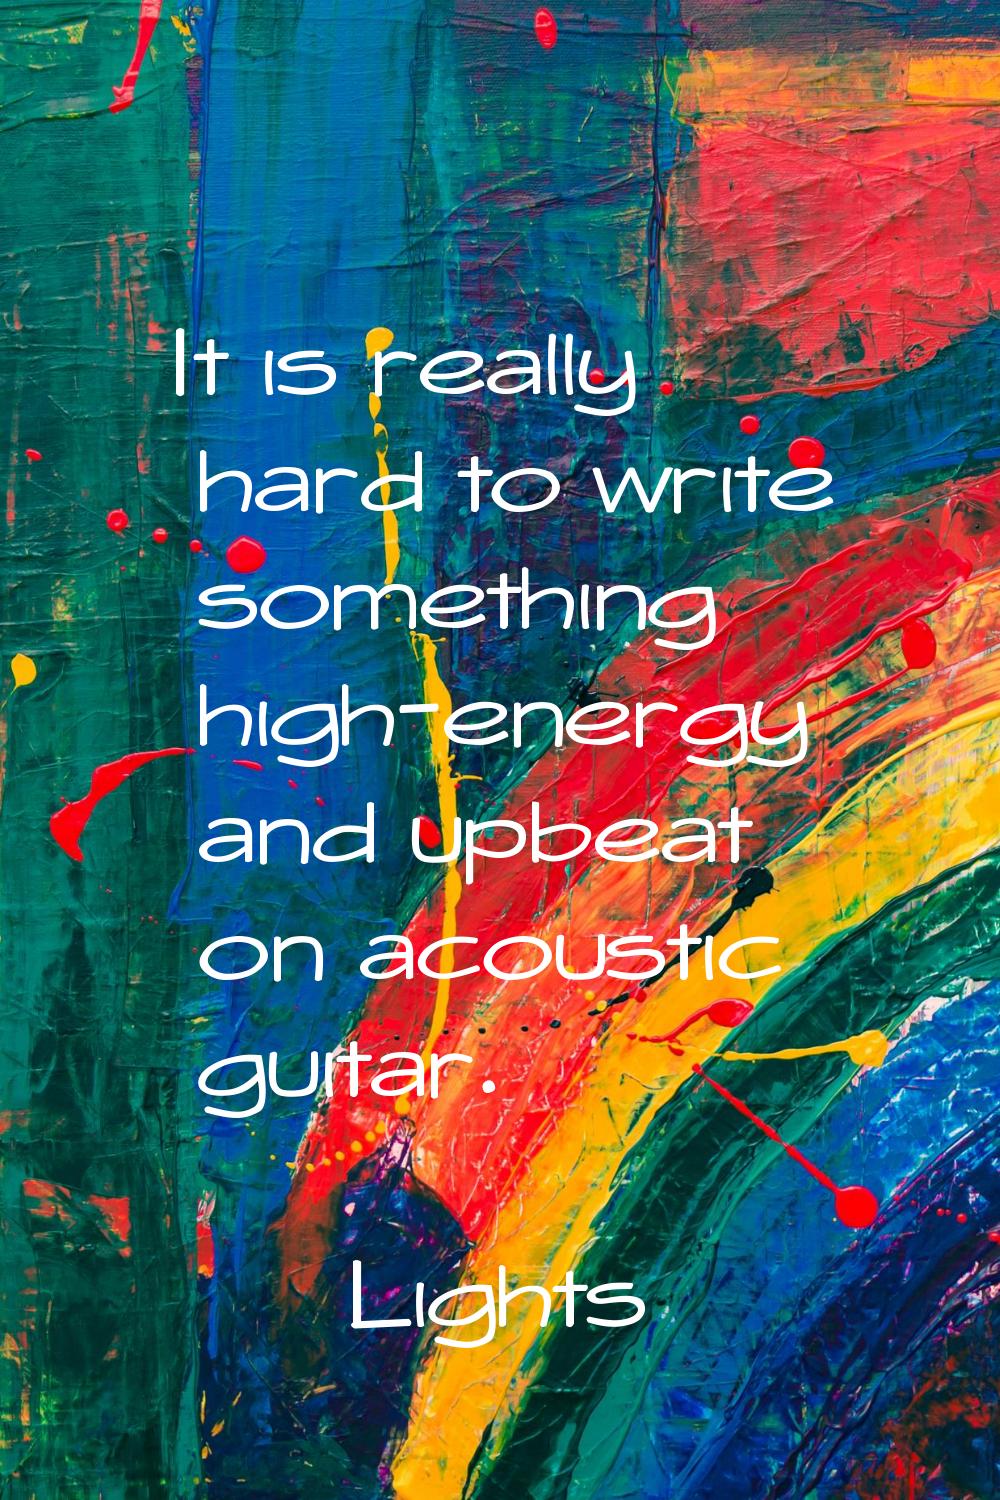 It is really hard to write something high-energy and upbeat on acoustic guitar.